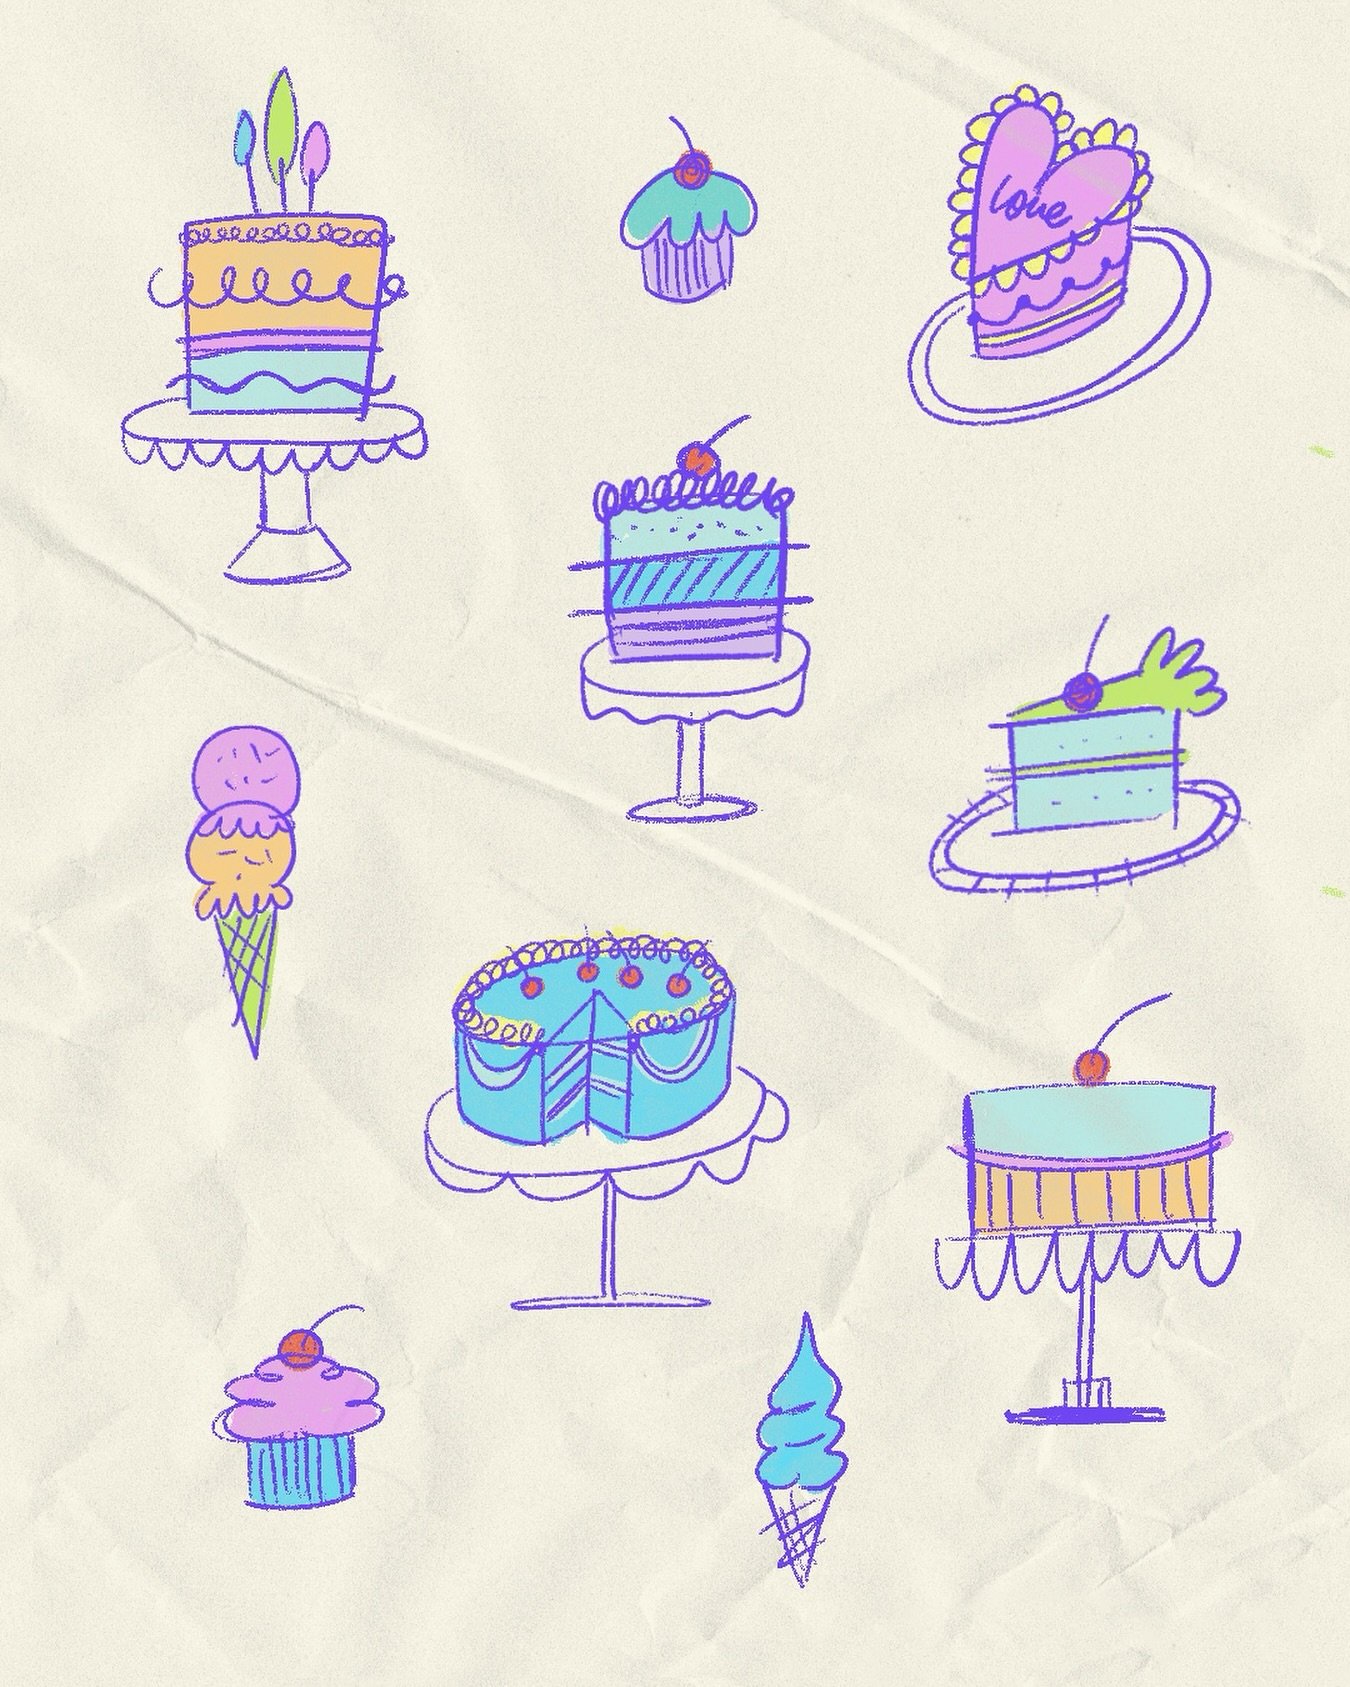 Today I&rsquo;m sharing an illustration that I never shared before 💜✨🎂🧁

I love making these type of drawings but I usually keep them to myself 🙈

Would you like to see more content like this? 🙂

#doodles #colorful #illustrations #doodleart #dra